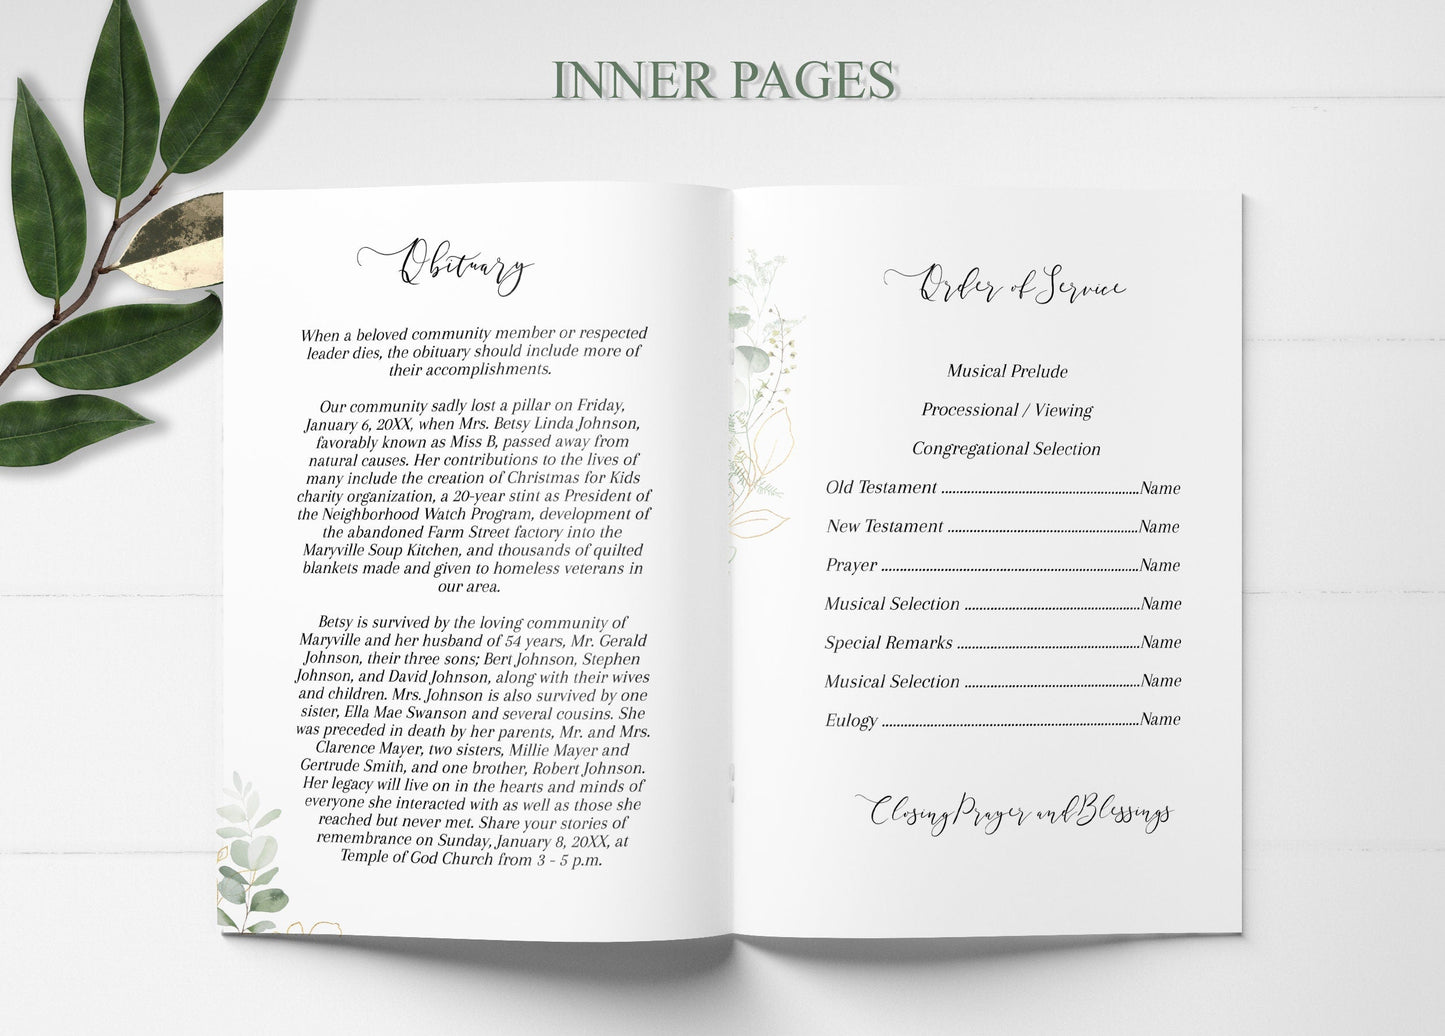 Photo Collage Funeral Program Template - 8 Page